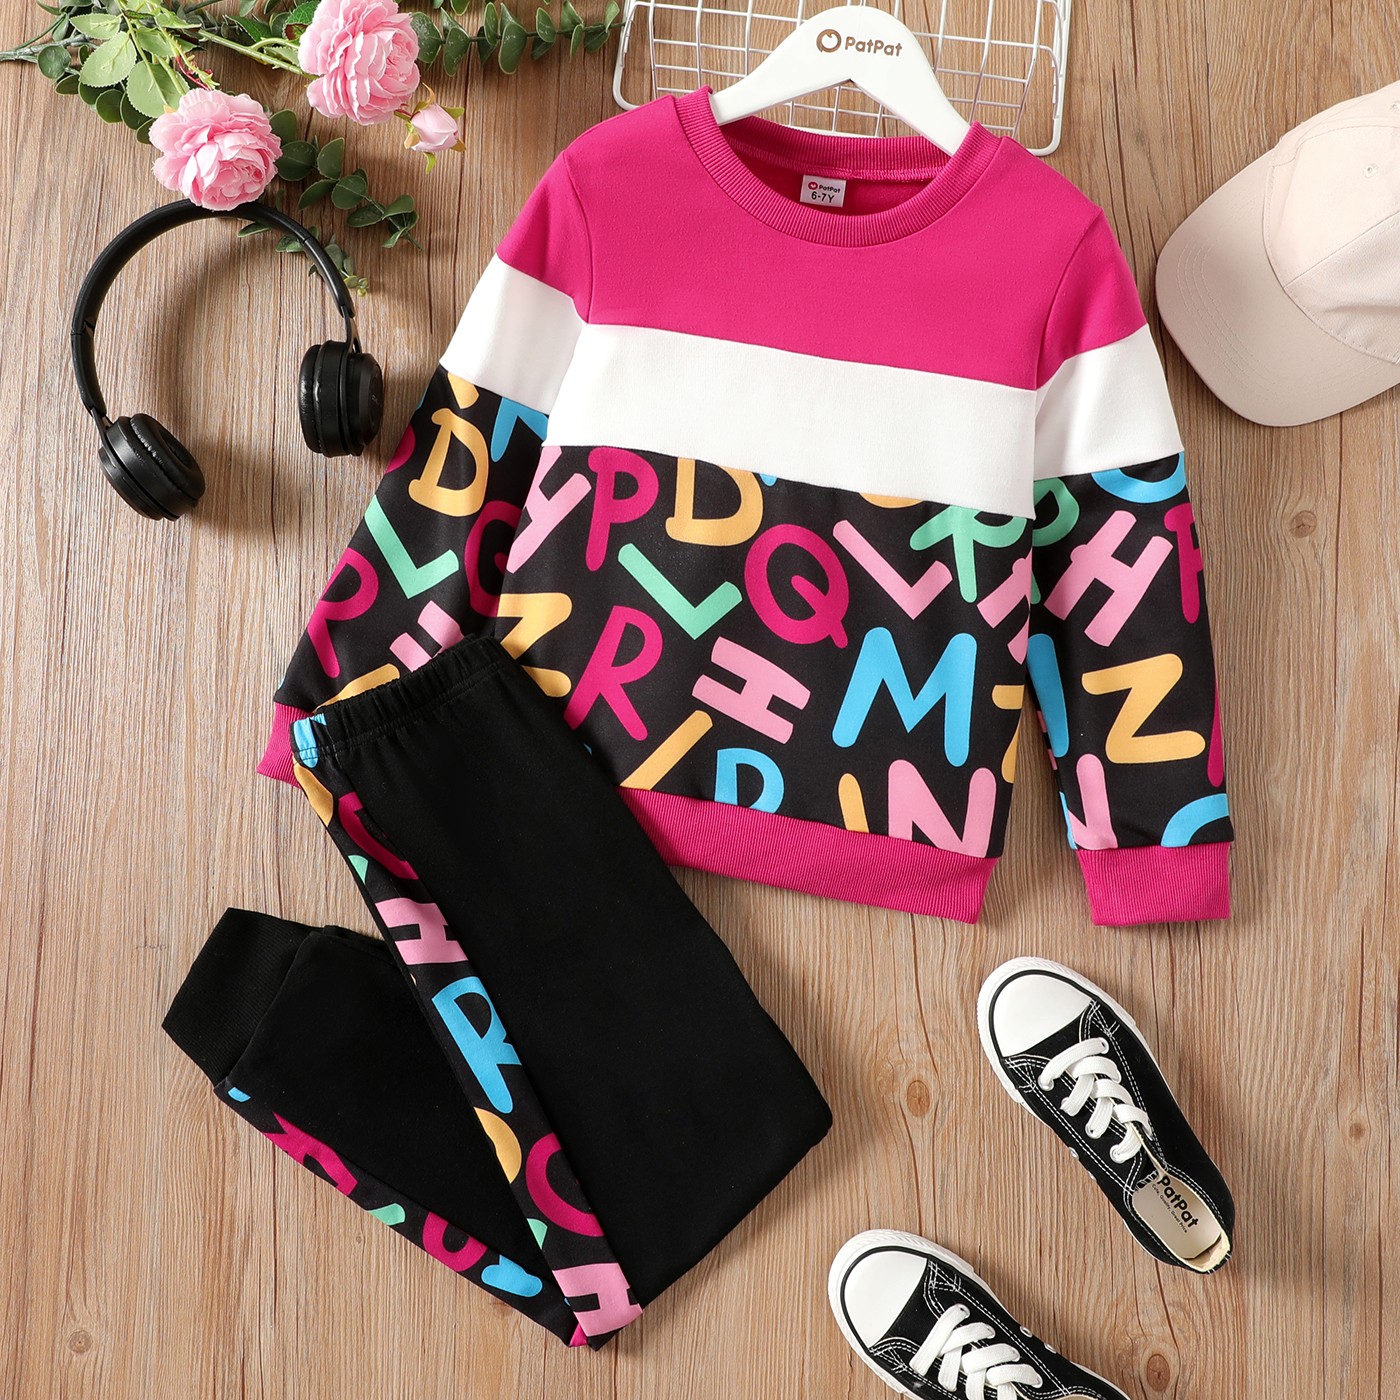 

Patpat 2pcs Kid Girl Casual & Trend Letter Print Colorblock Crew Neck Round Neck Long*sleeve Sweatshirt And Elasticized Pants Fashion Set For Spring & Autumn/fall